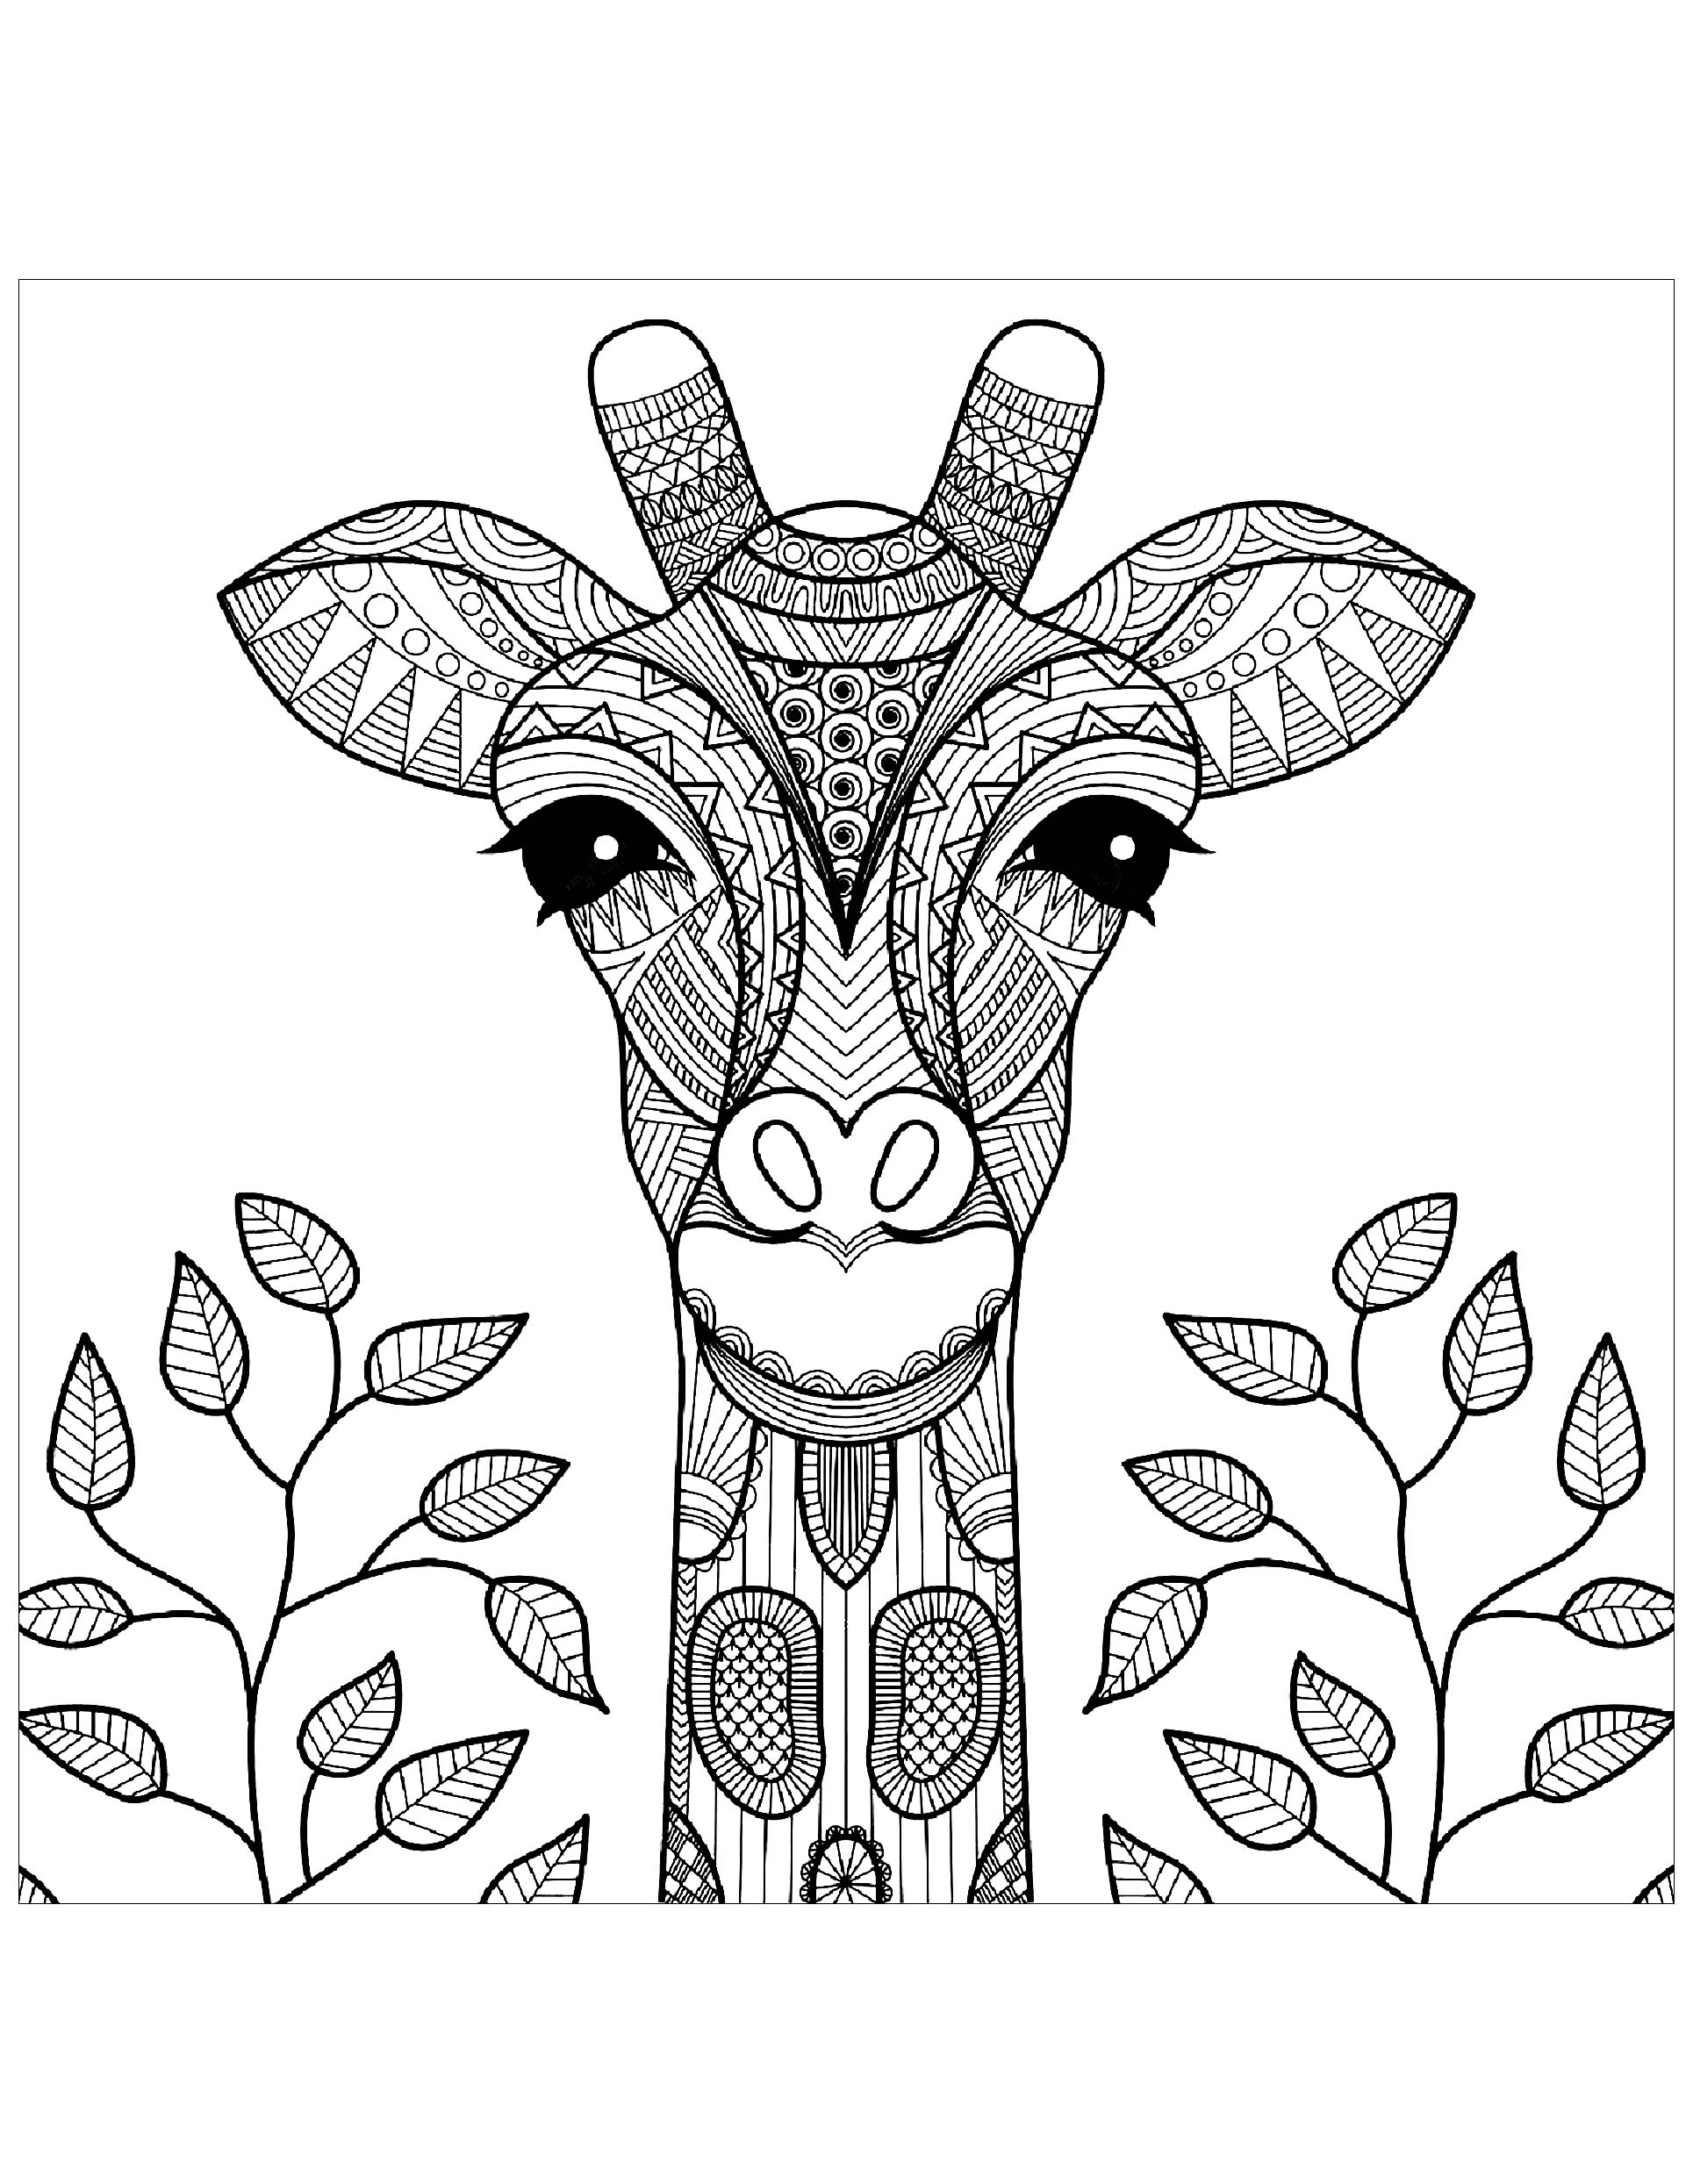 Simple Giraffes coloring page to print and color for free, Artist : Bimdeedee   Source : 123rf